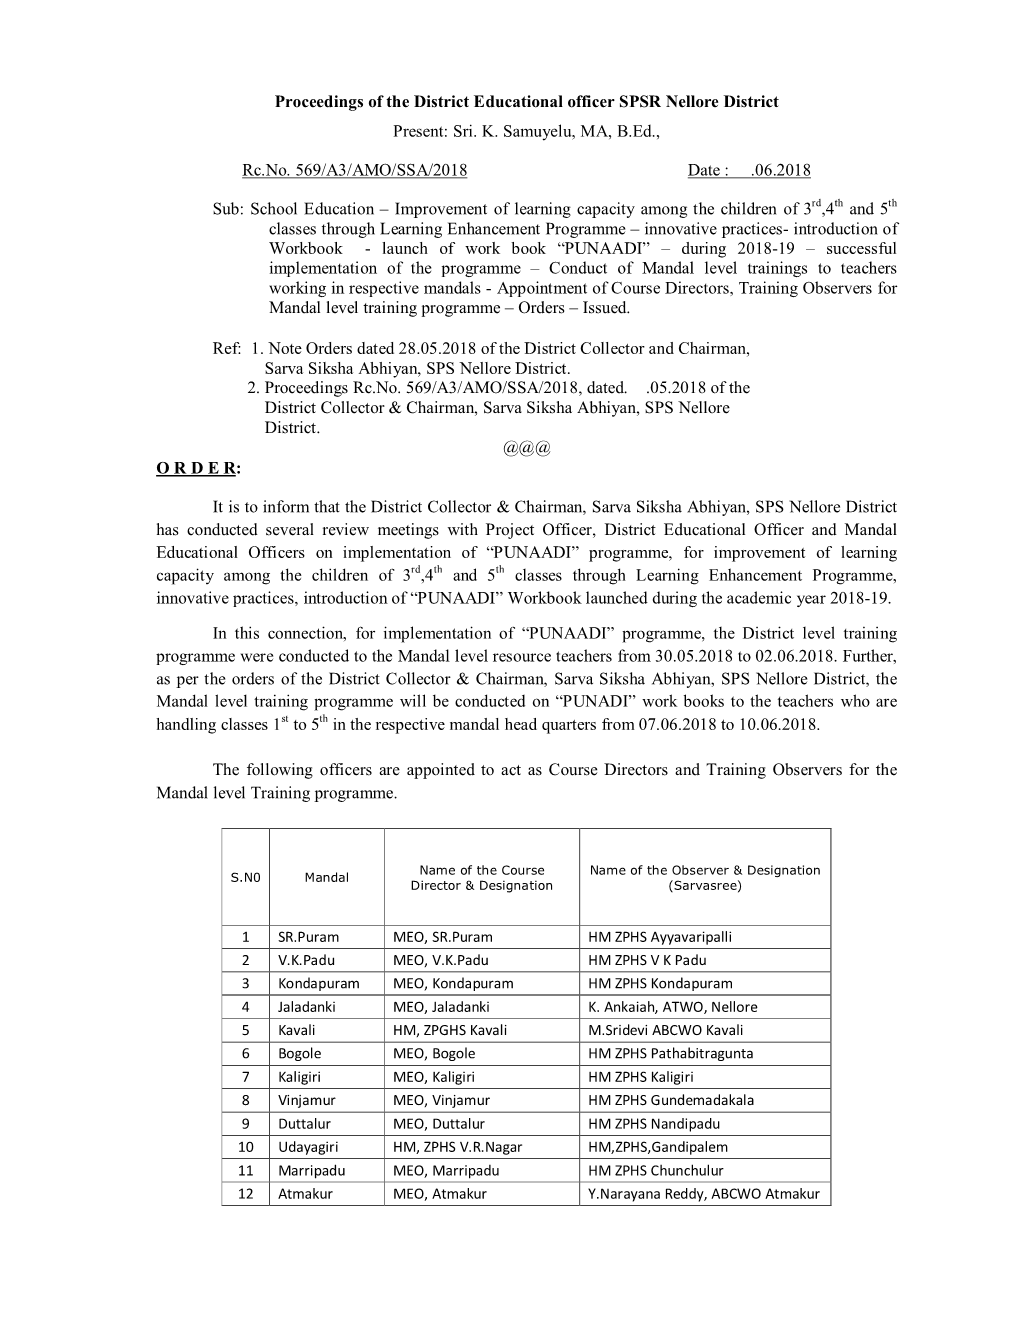 Proceedings of the District Educational Officer SPSR Nellore District